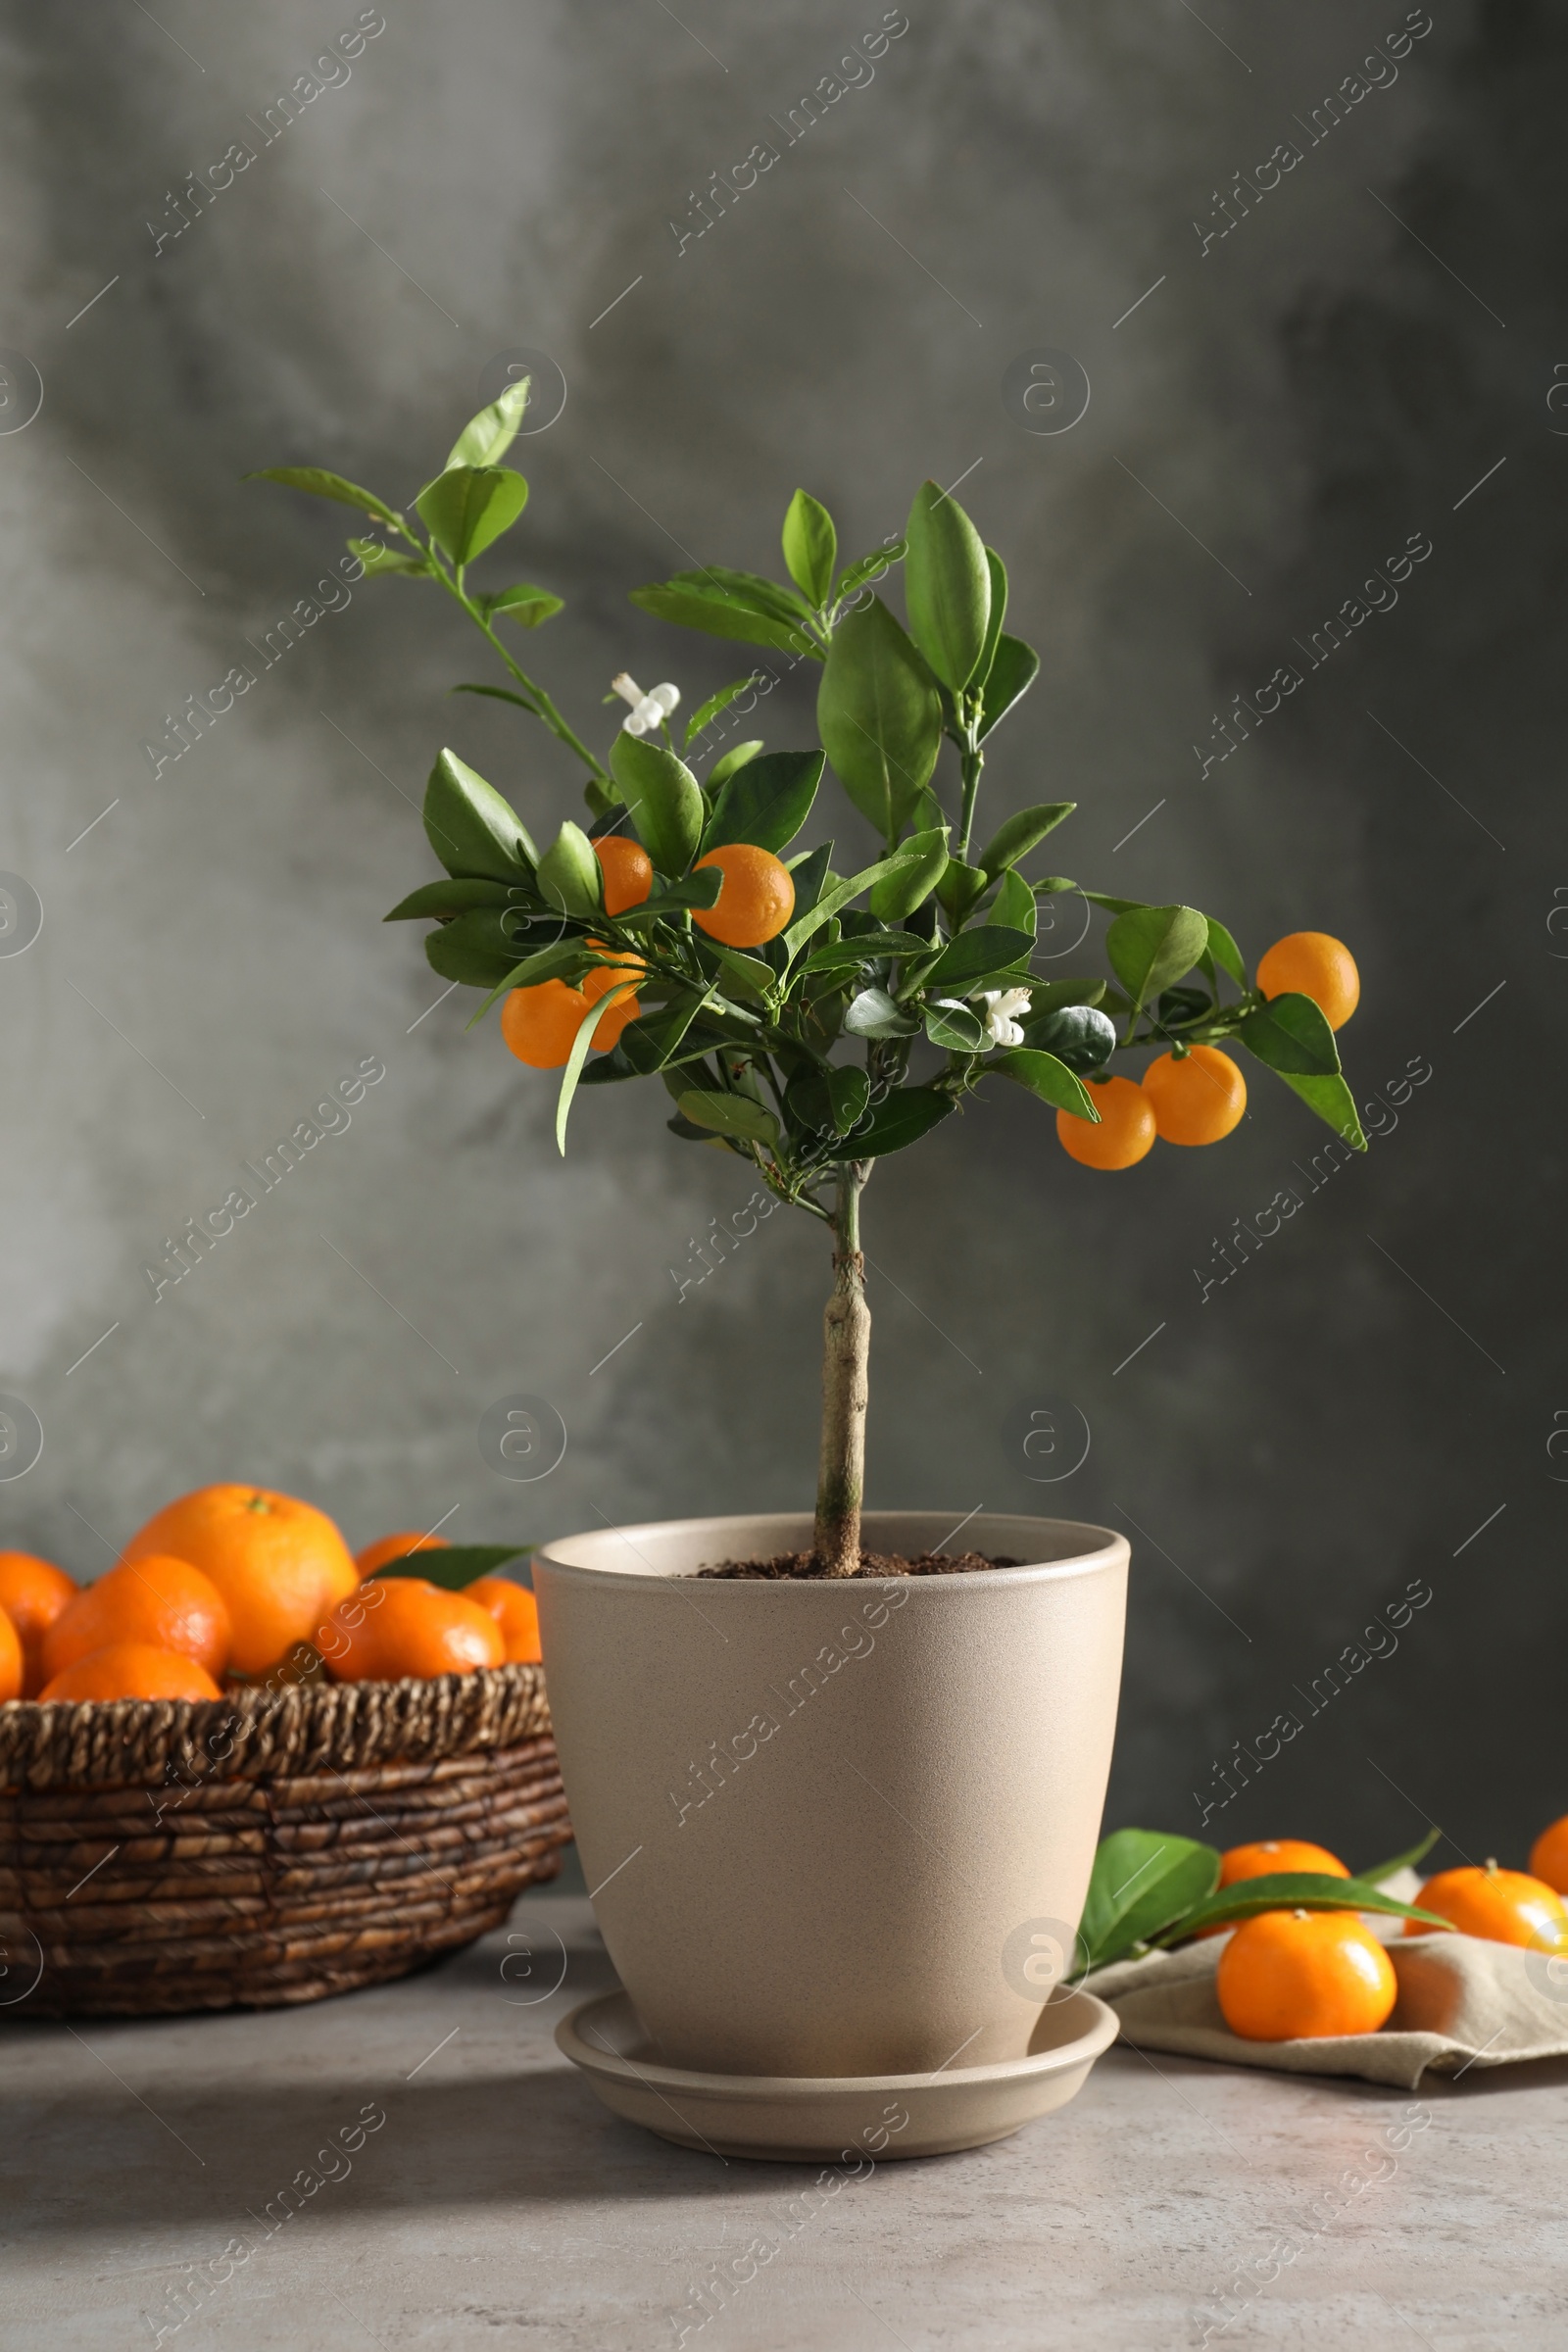 Photo of Potted citrus tree and fruits on table against grey background